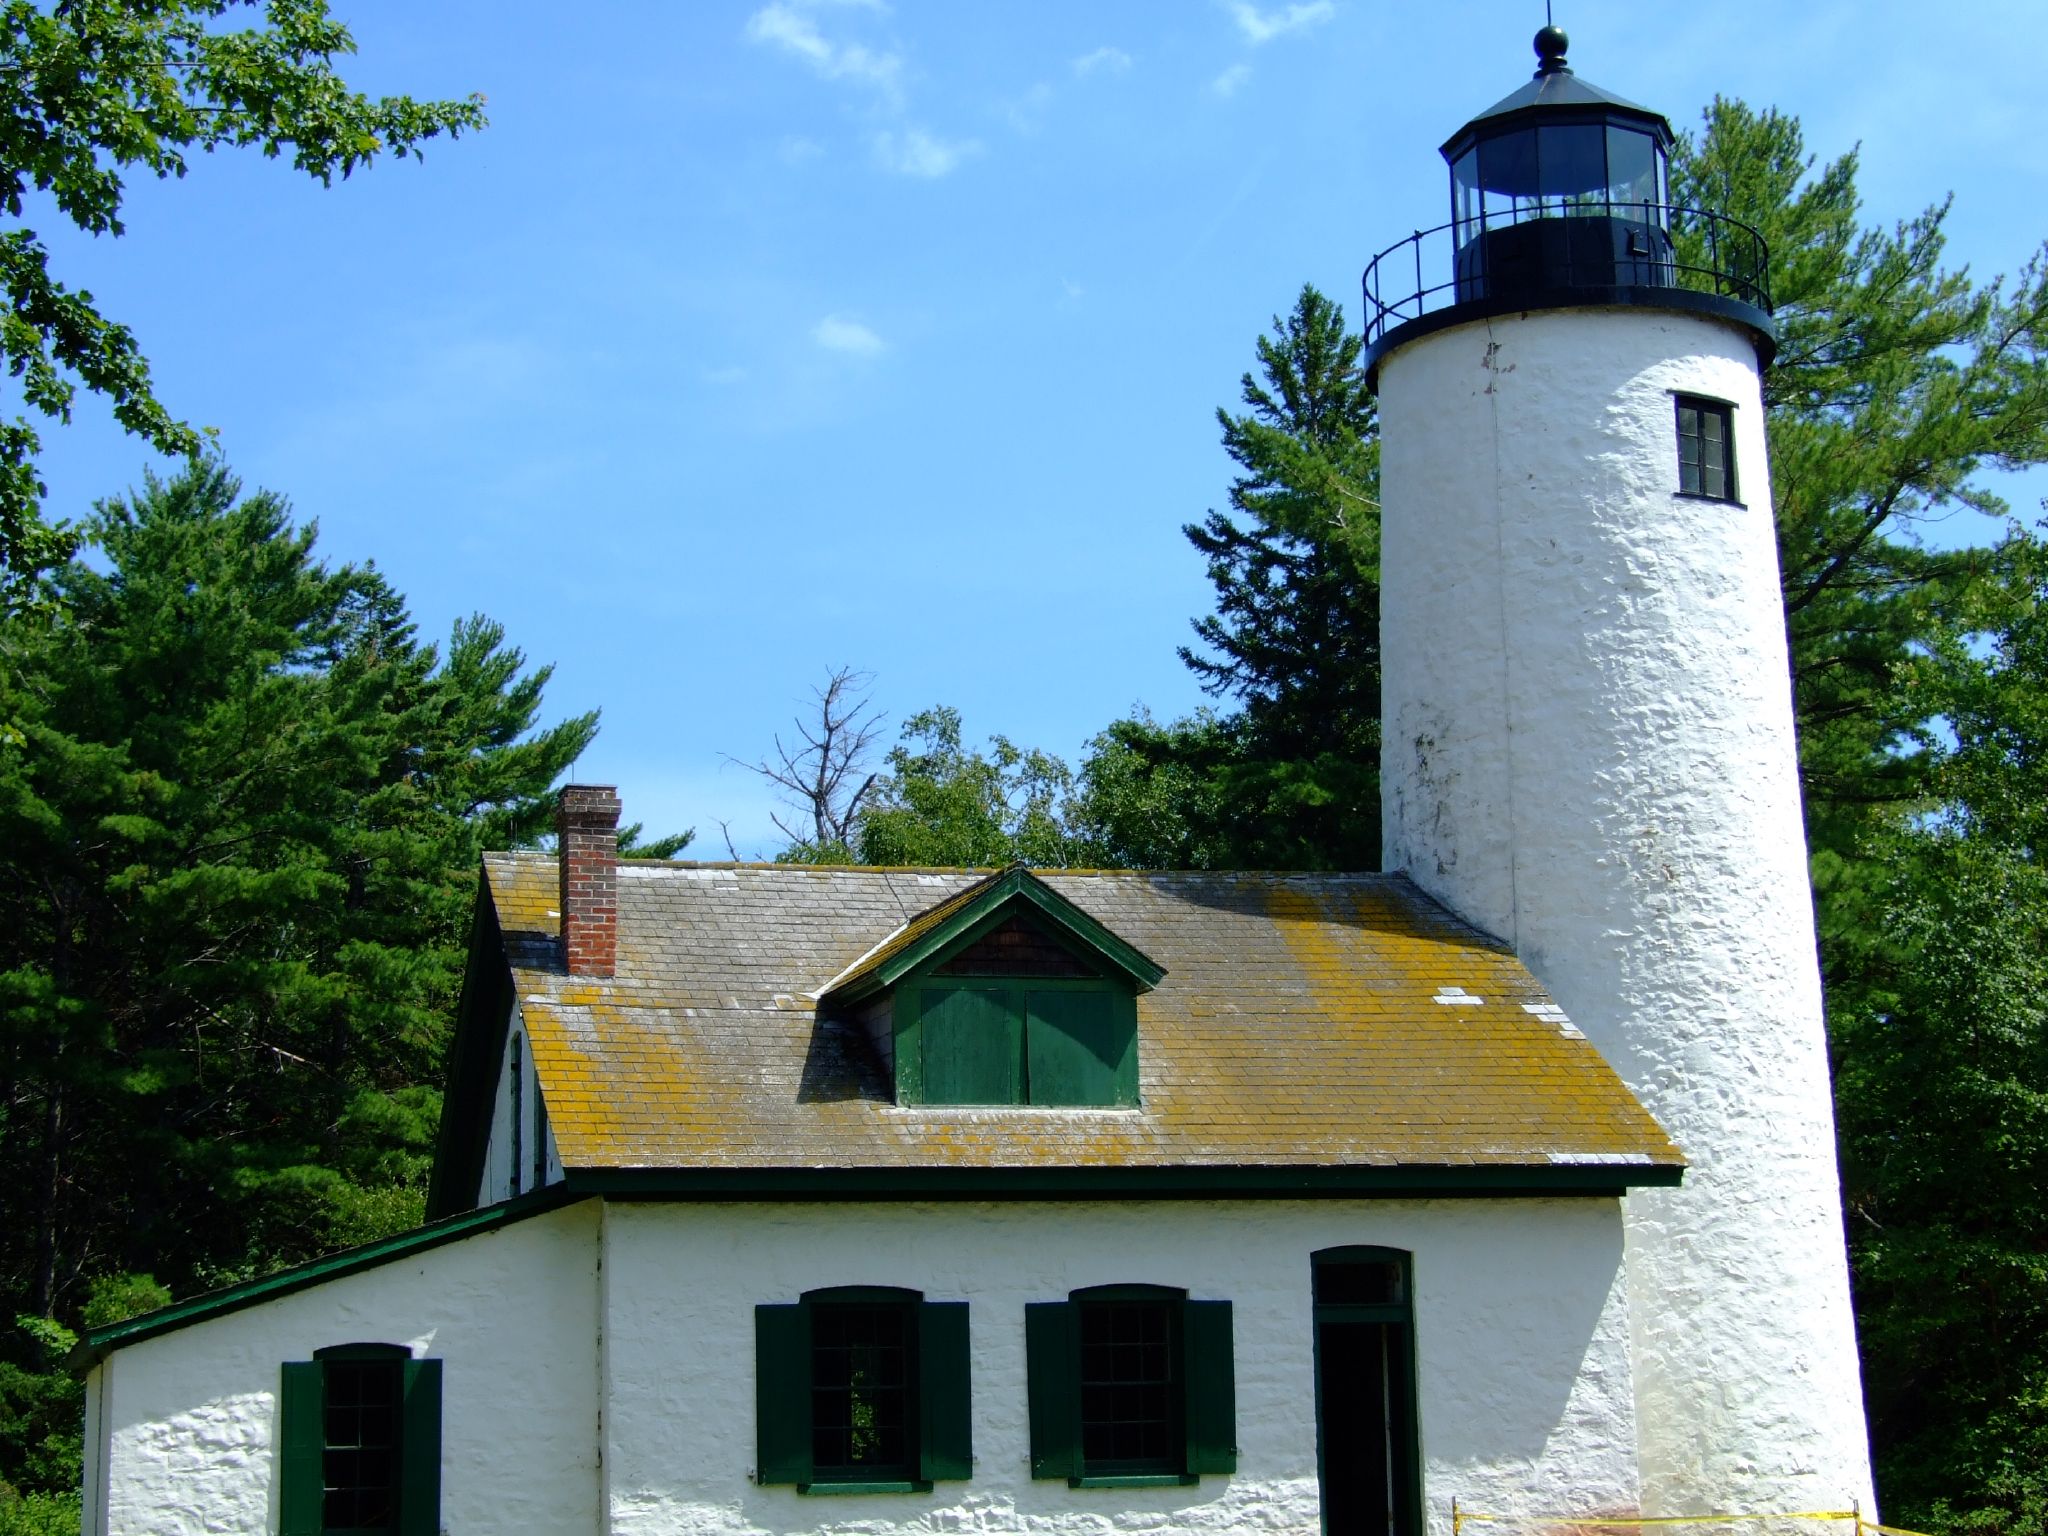 Apostle Islands’ Lighthouse Repairs Wrapping Up